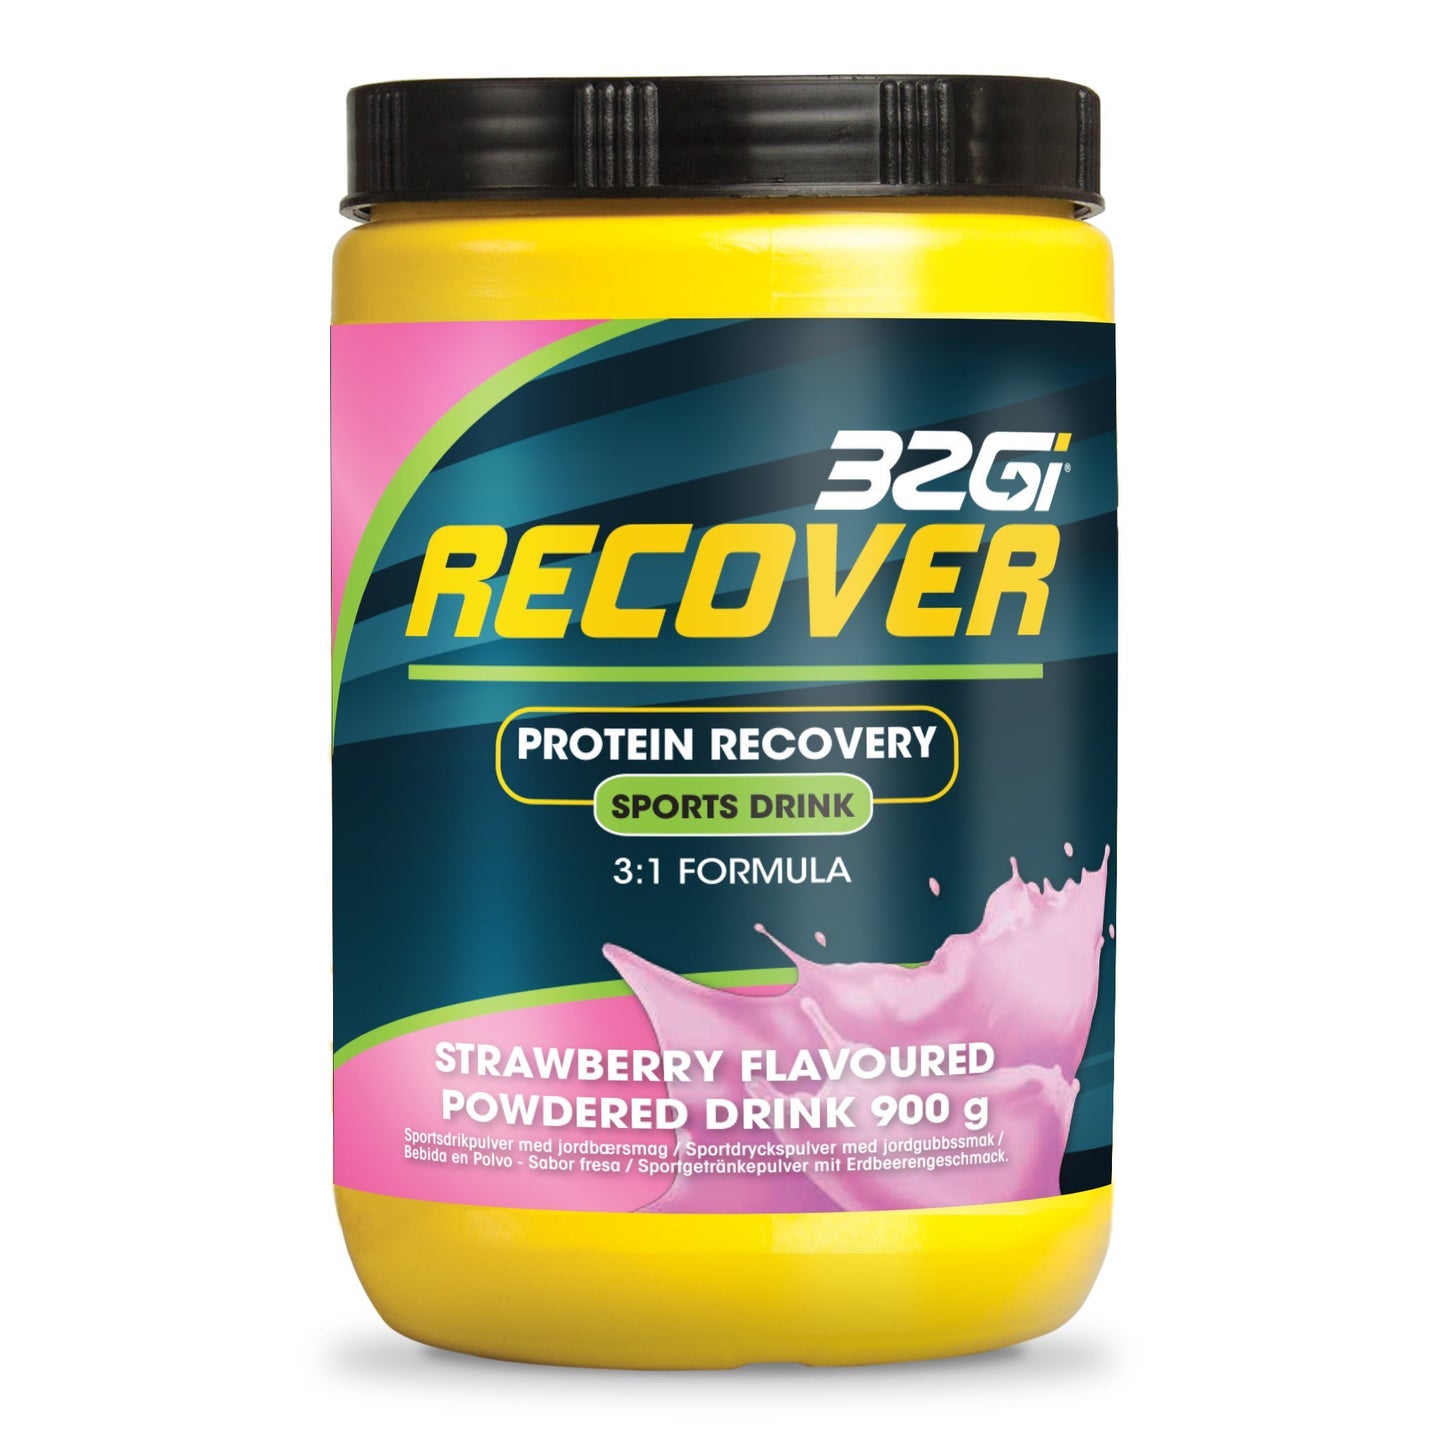 Recover - Carb 3:1 Protein with BCAAs - 32Gi United Kingdom